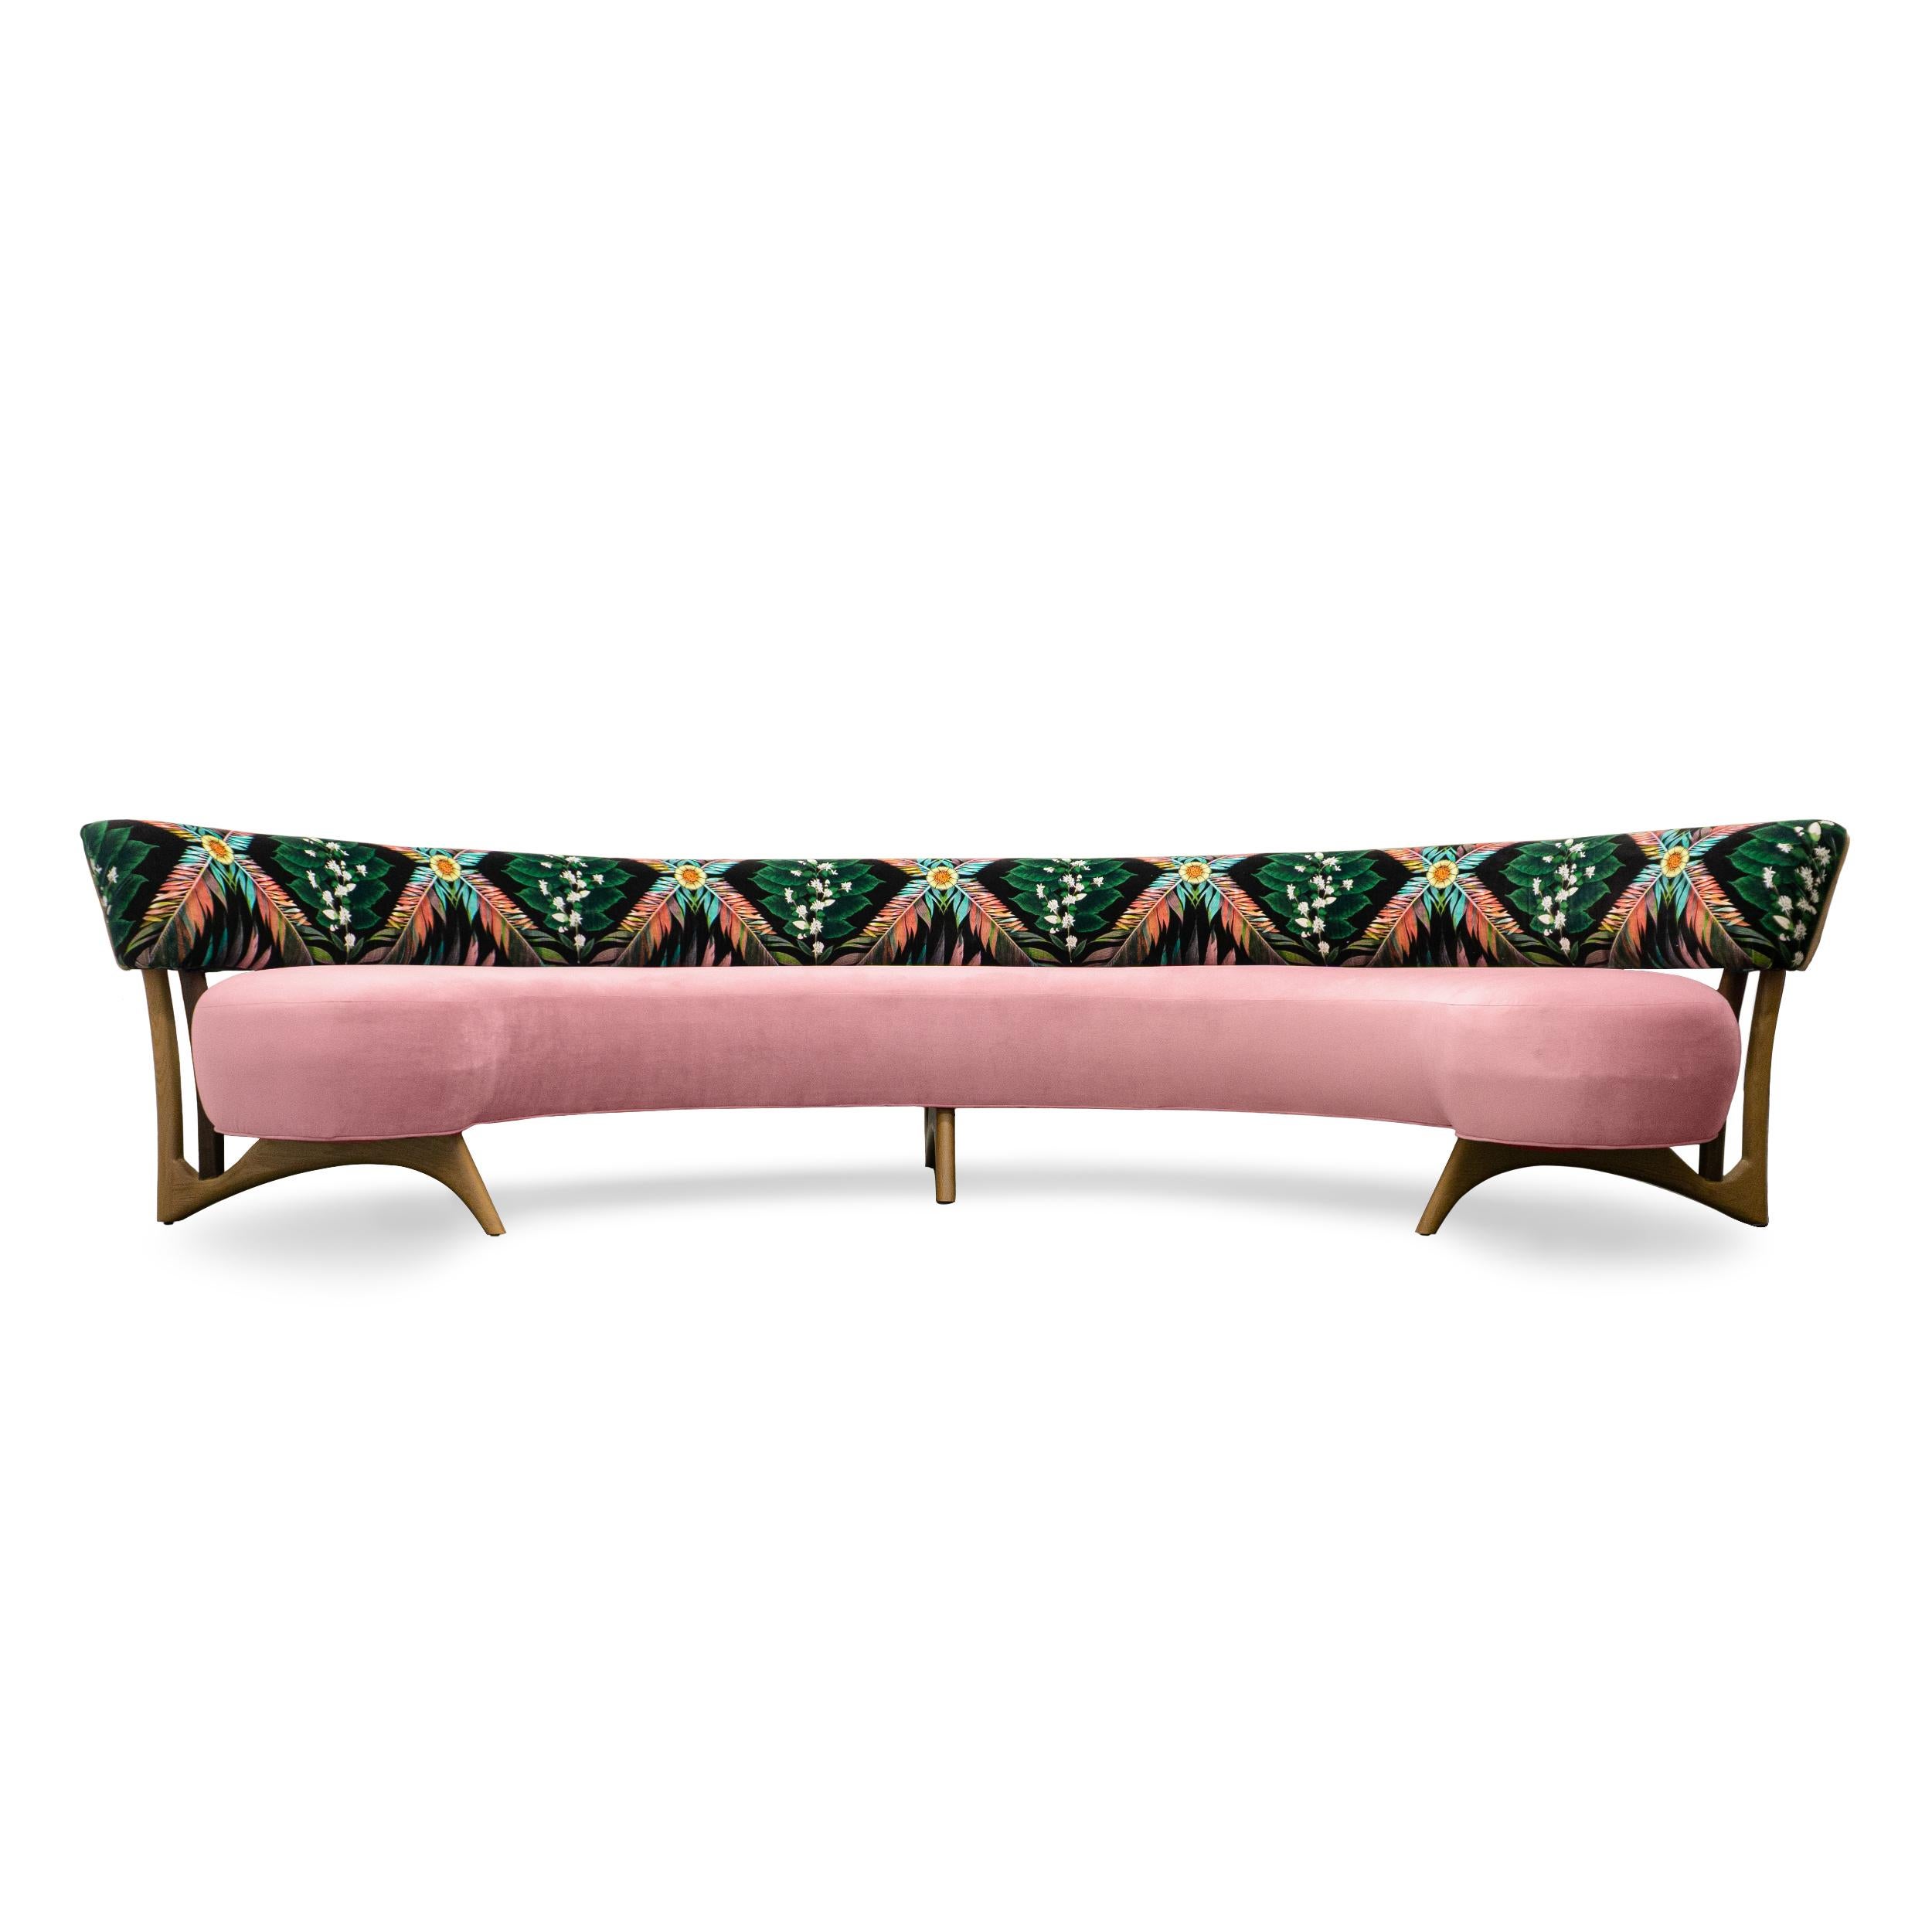 Modern Midcentury Floating Curved Sofa/w Printed Velvet and Burlap Welting For Sale